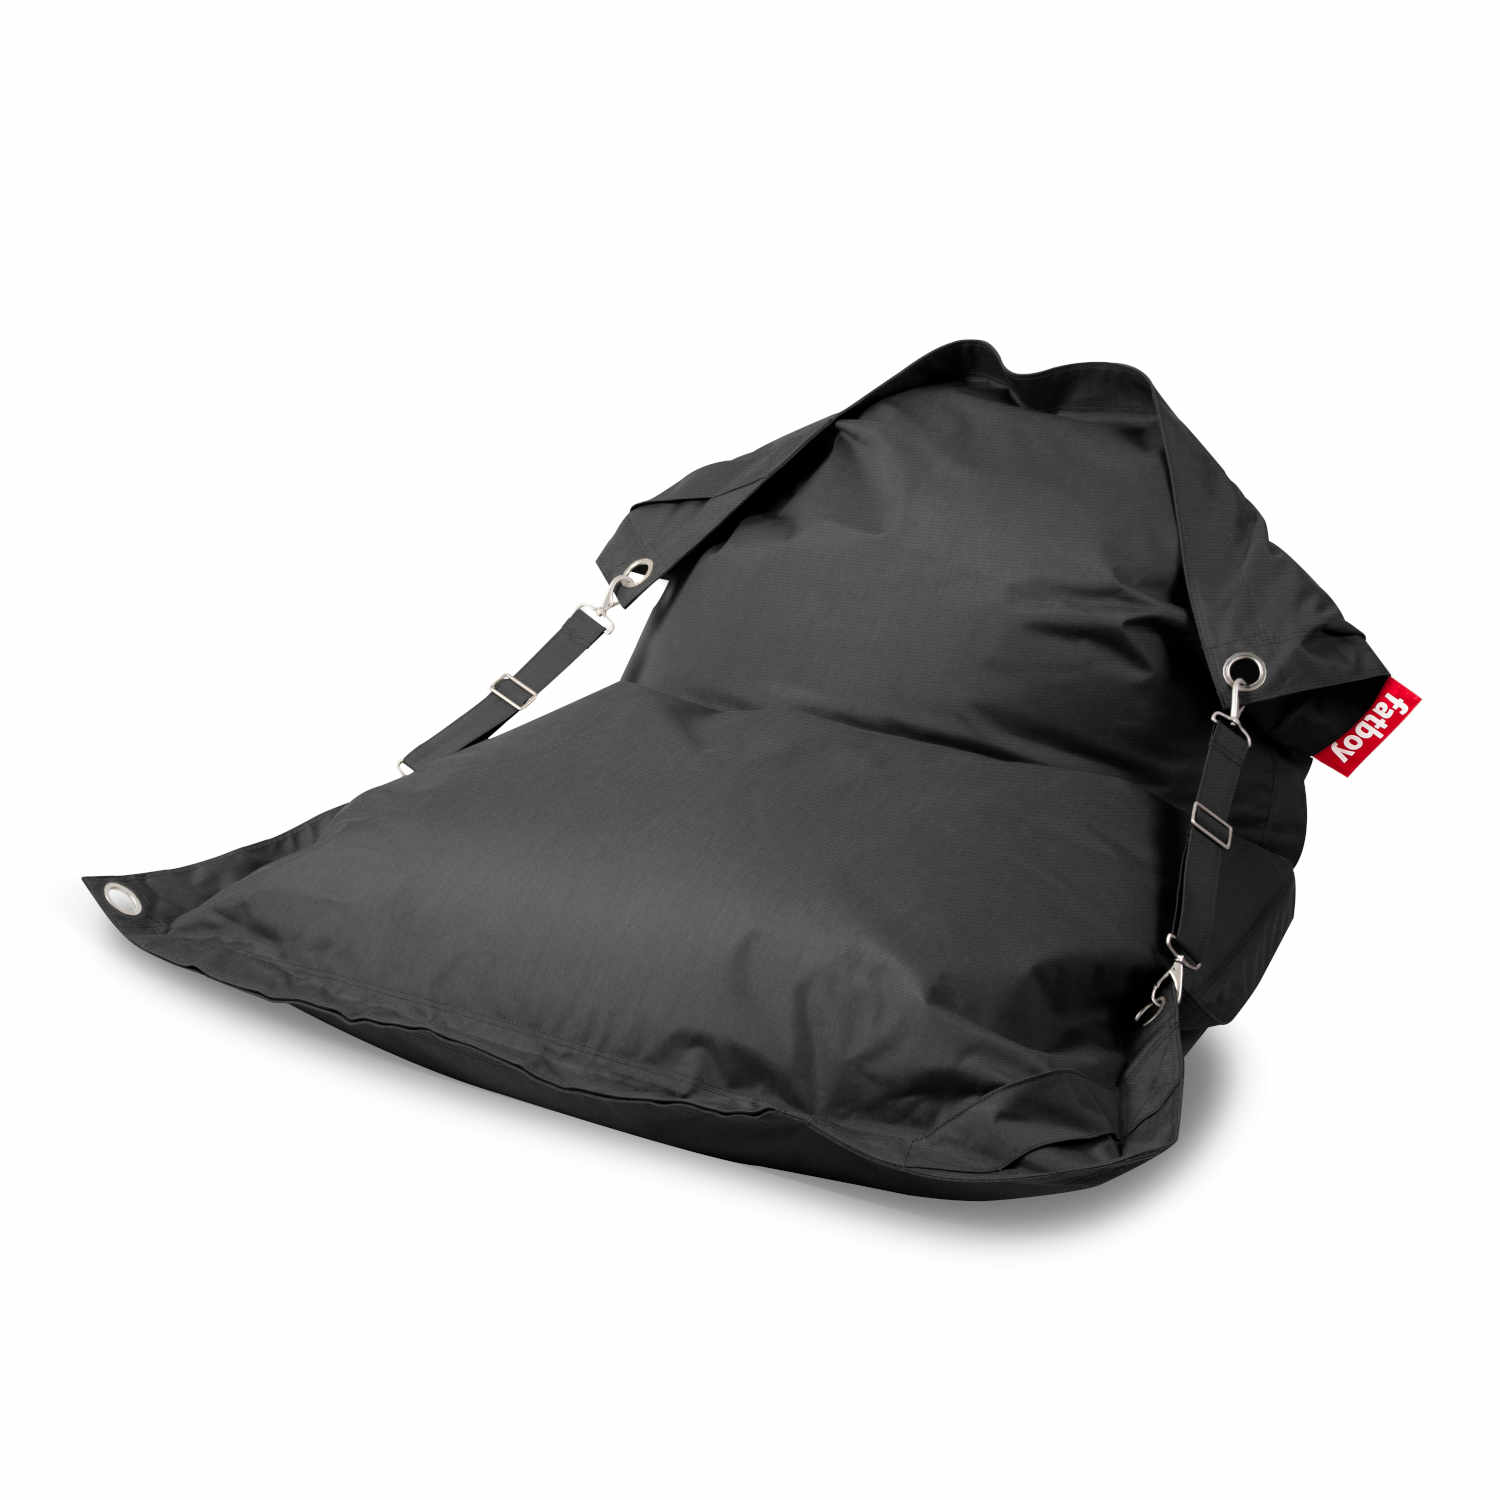 Buggle-Up Outdoor, Farbe charcoal von Fatboy